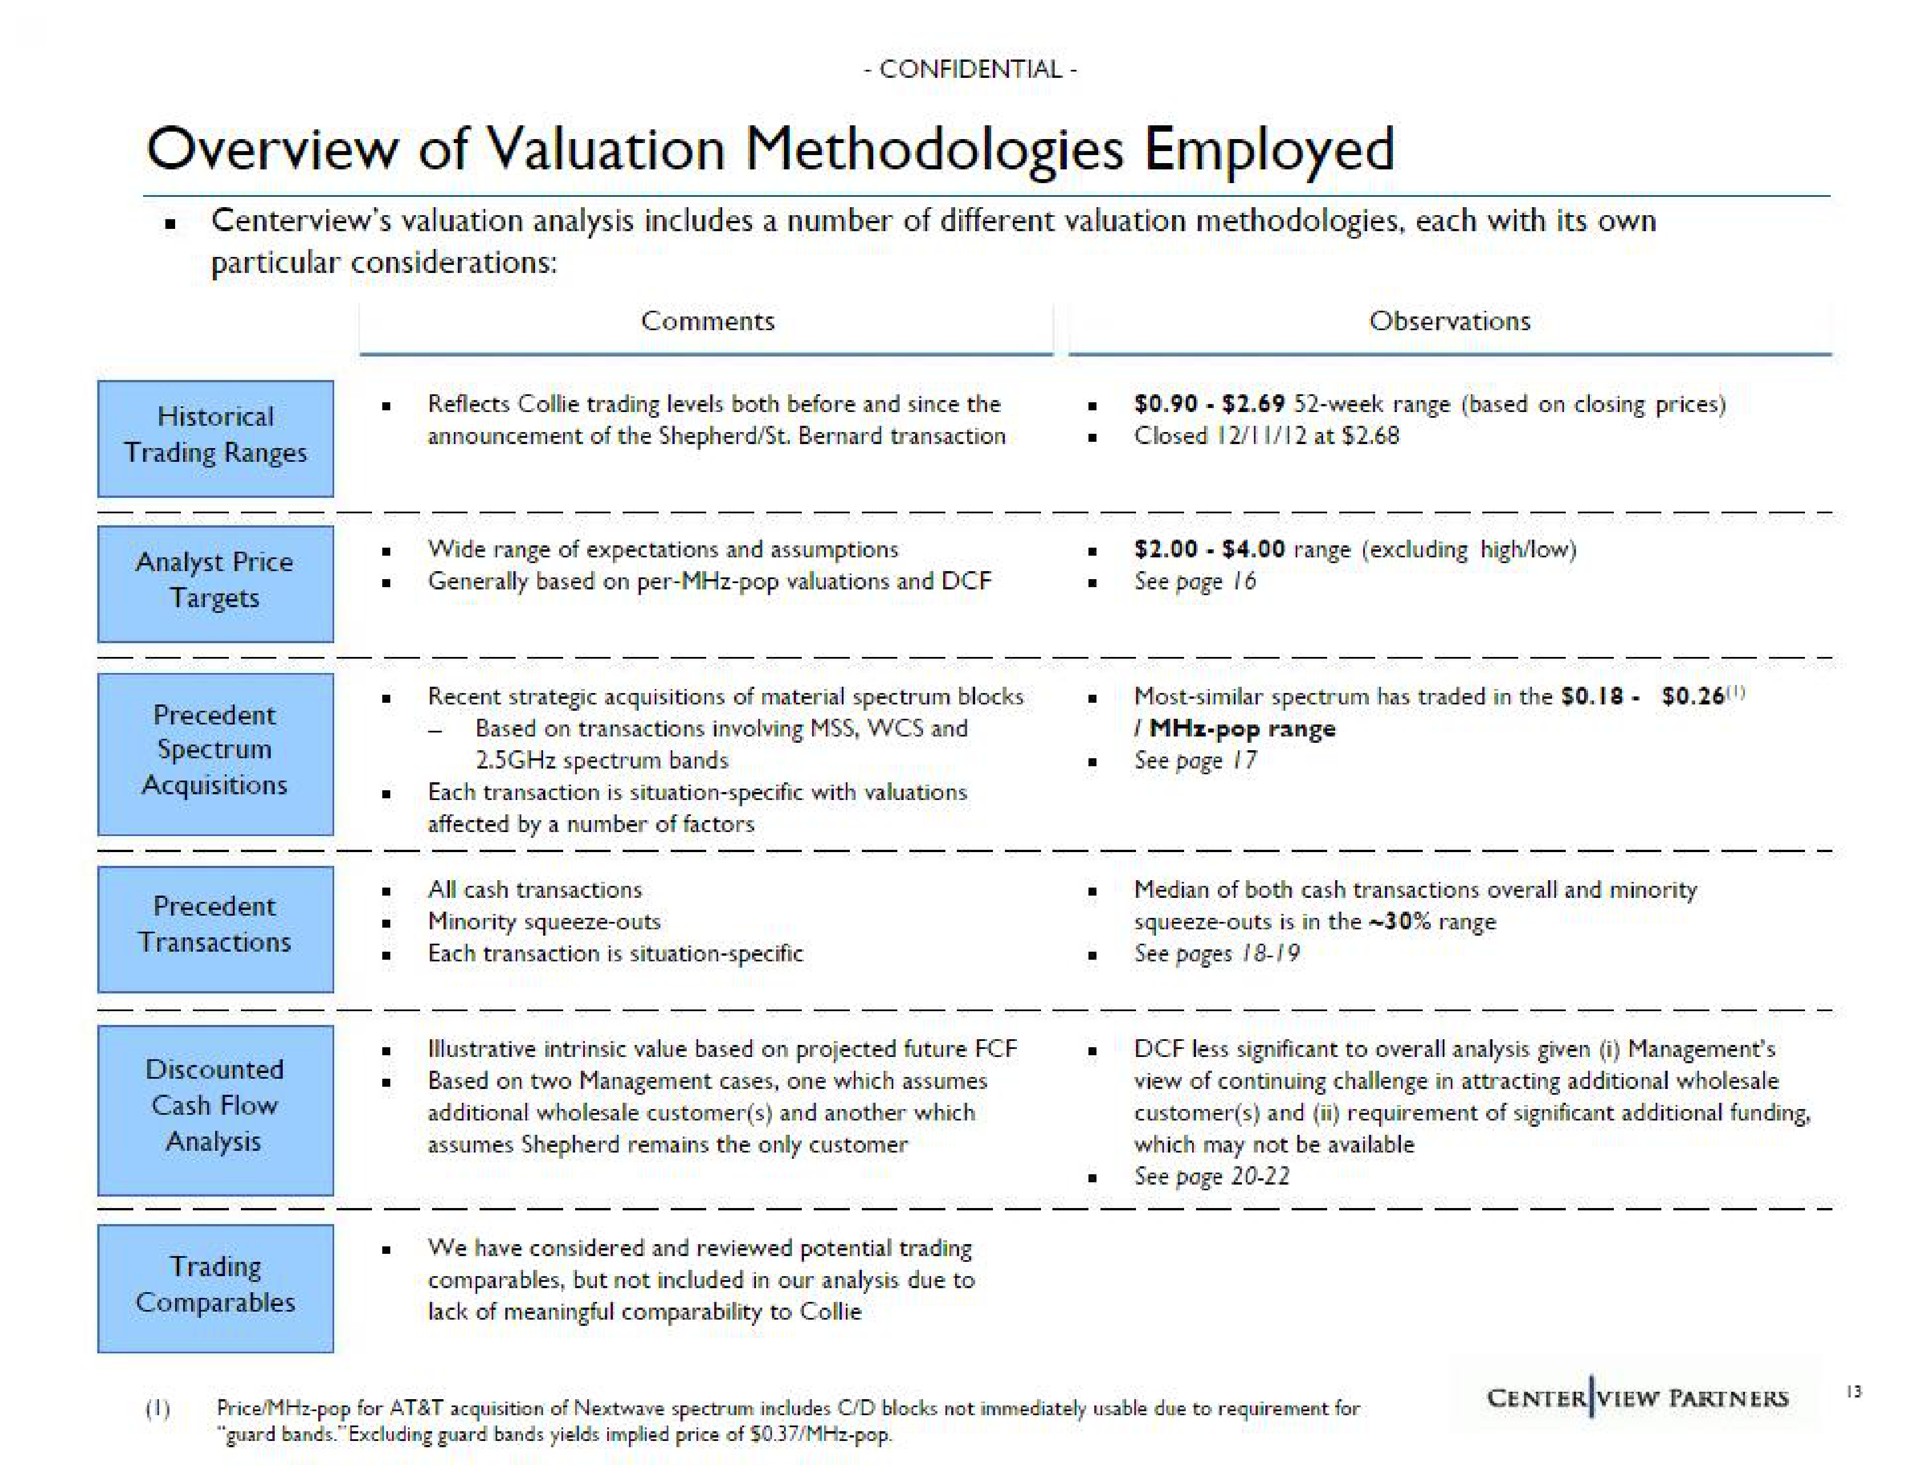 overview of valuation methodologies employed | Centerview Partners